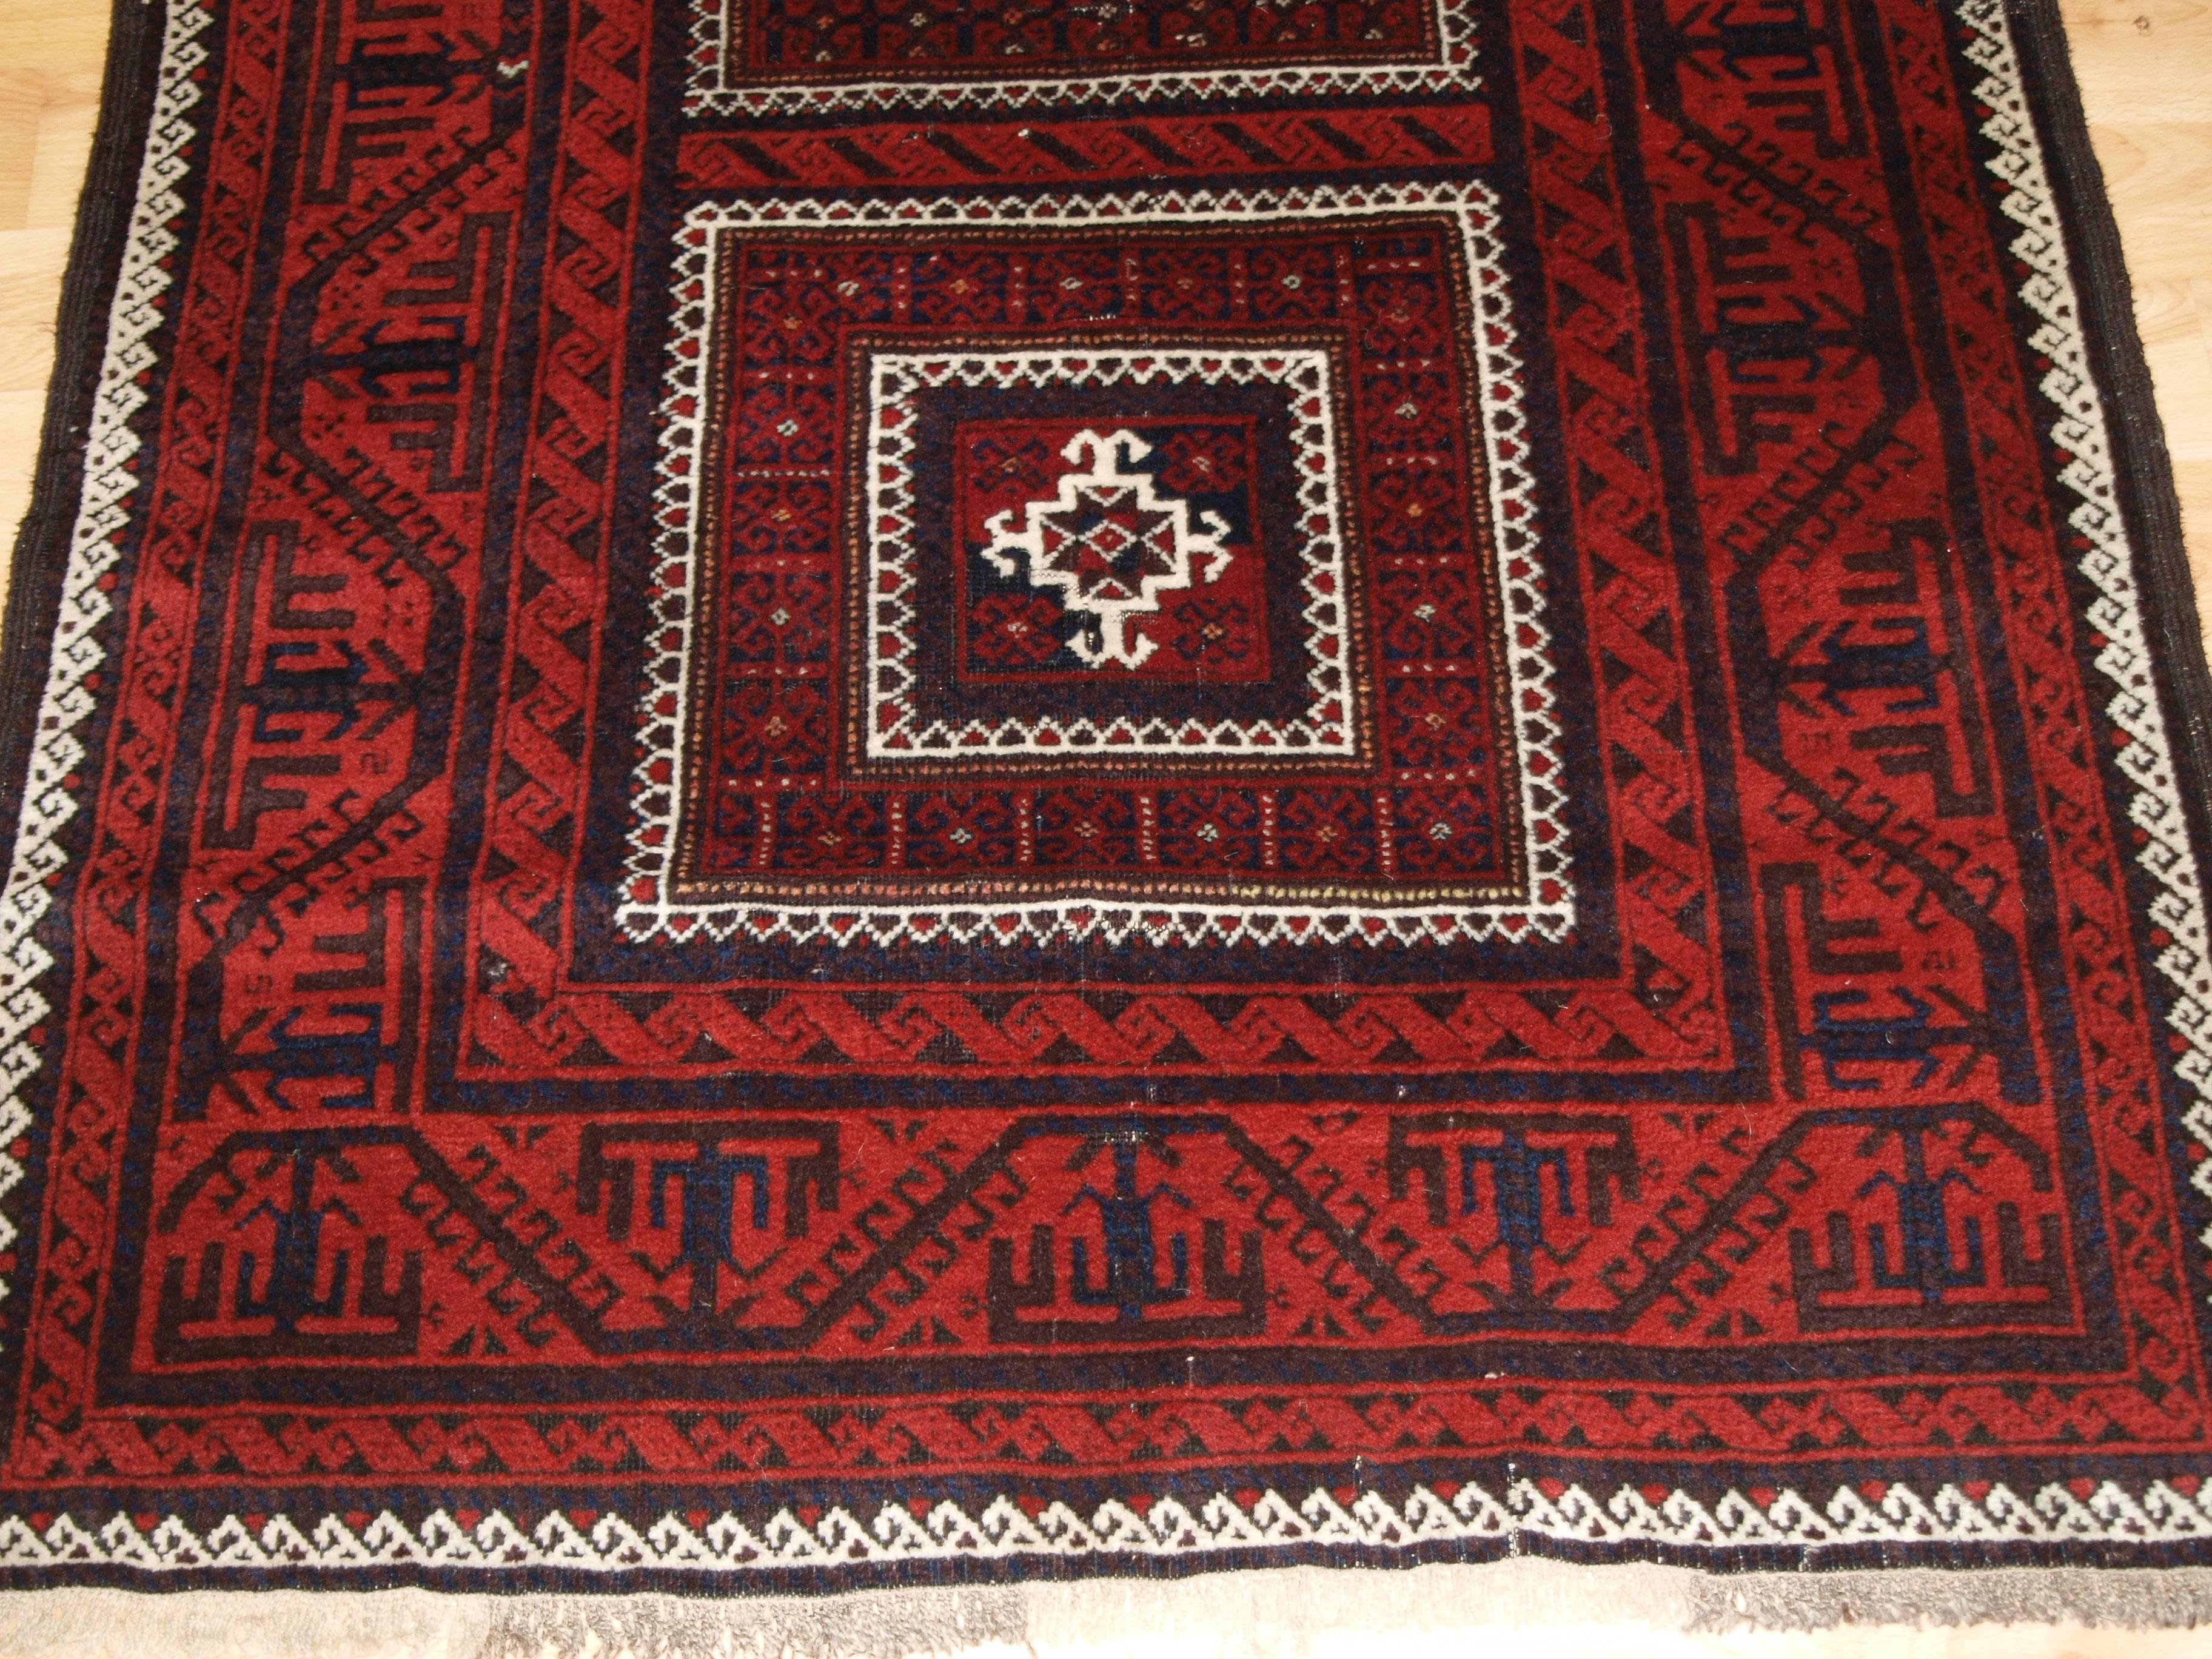 Antique Baluch Rug with Unusual Three Compartment Design, circa 1900 For Sale 1